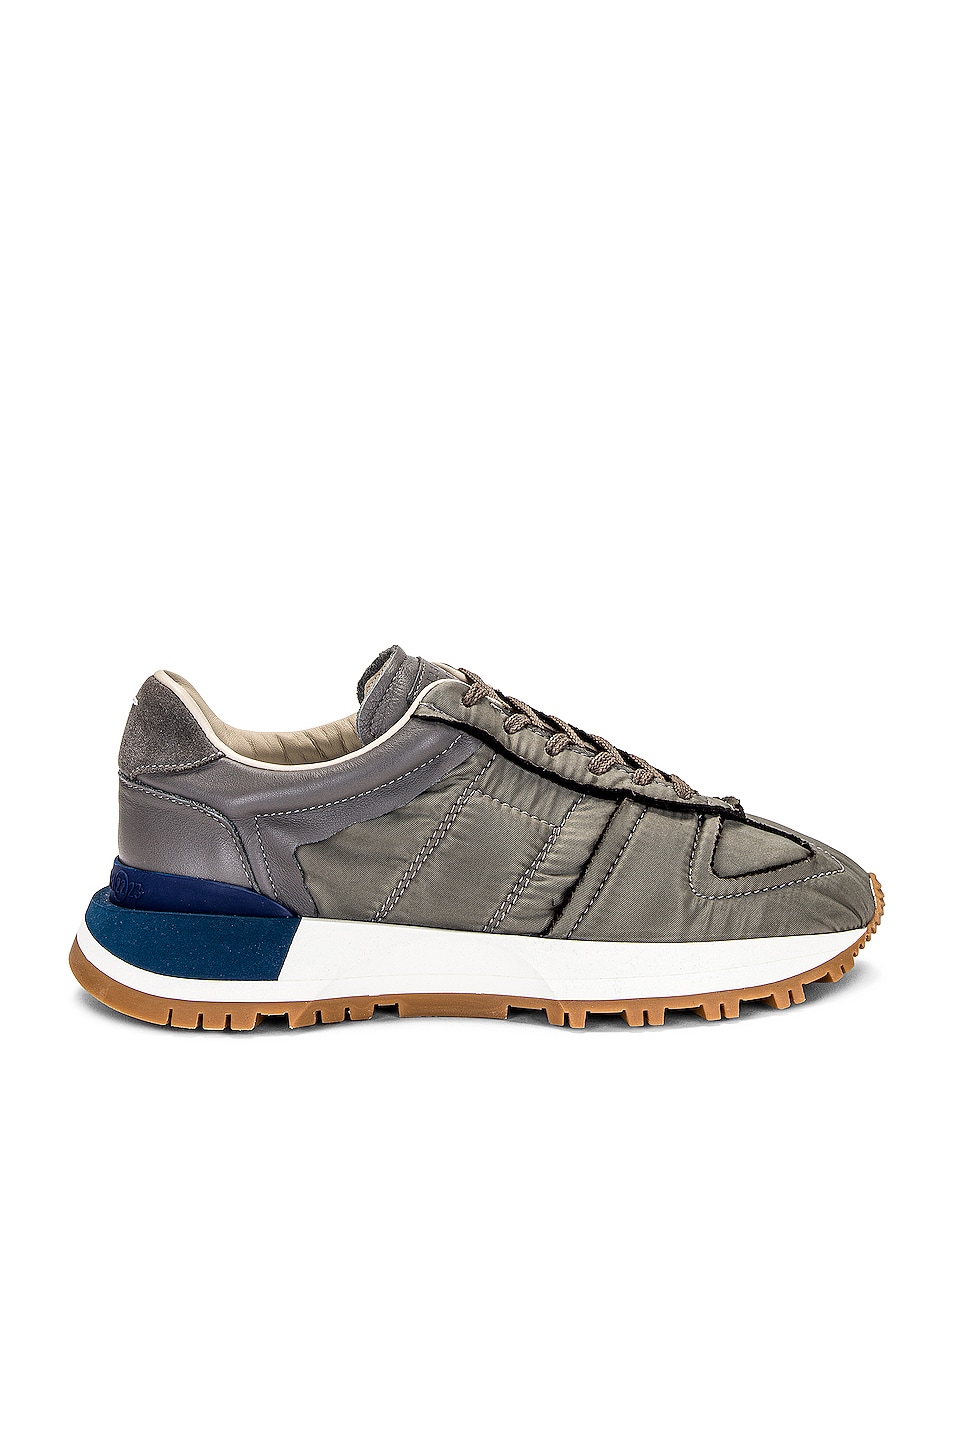 Image 1 of Maison Margiela Low Top Sneaker in Tundra